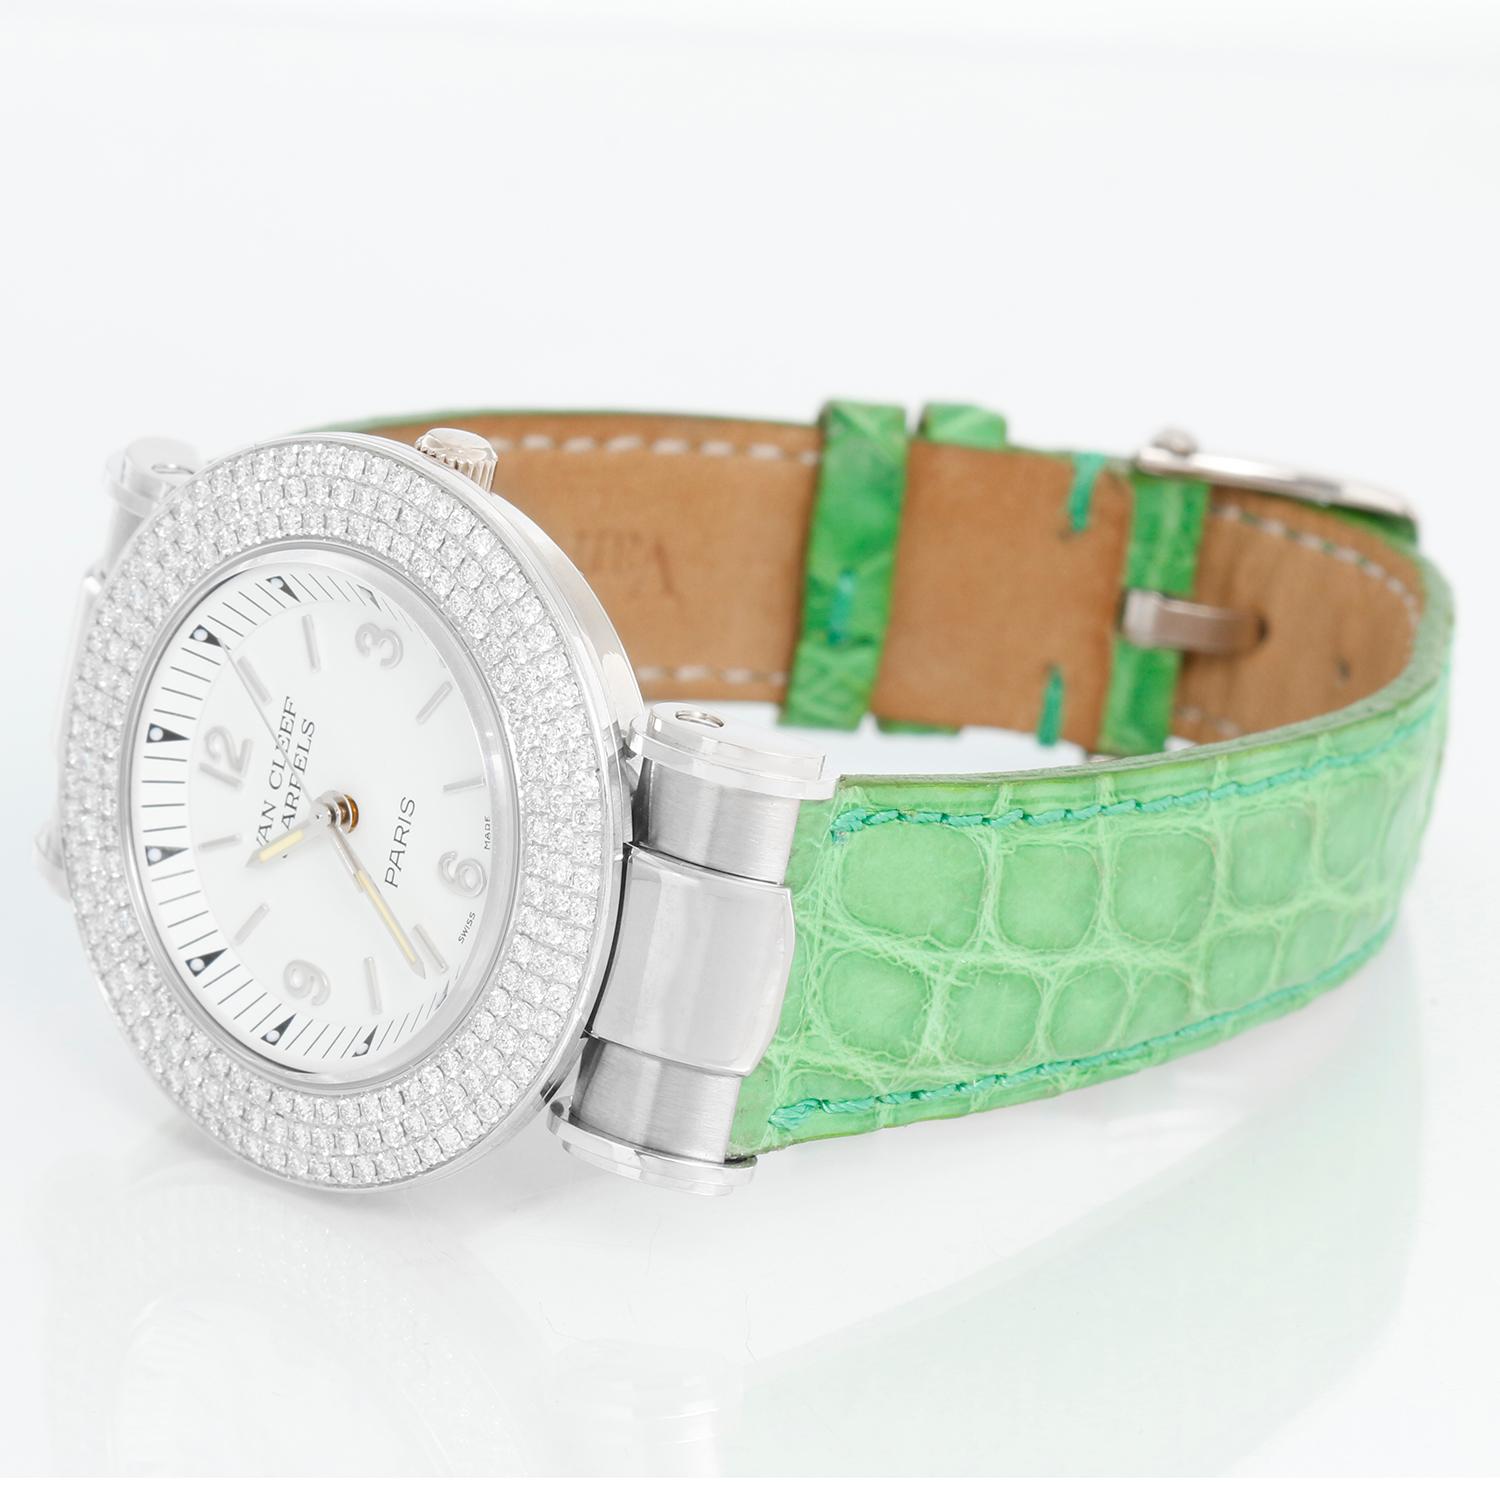 Van Cleef & Arpels White Gold Roma Diamond Ladies Watch - Quartz. 18K White gold with pave set diamond bezel ( 33mm). White dial with stick hour markers and Arabic numerals. Green Van Cleef & Arpels strap with tang buckle. Pre-owned with custom box .